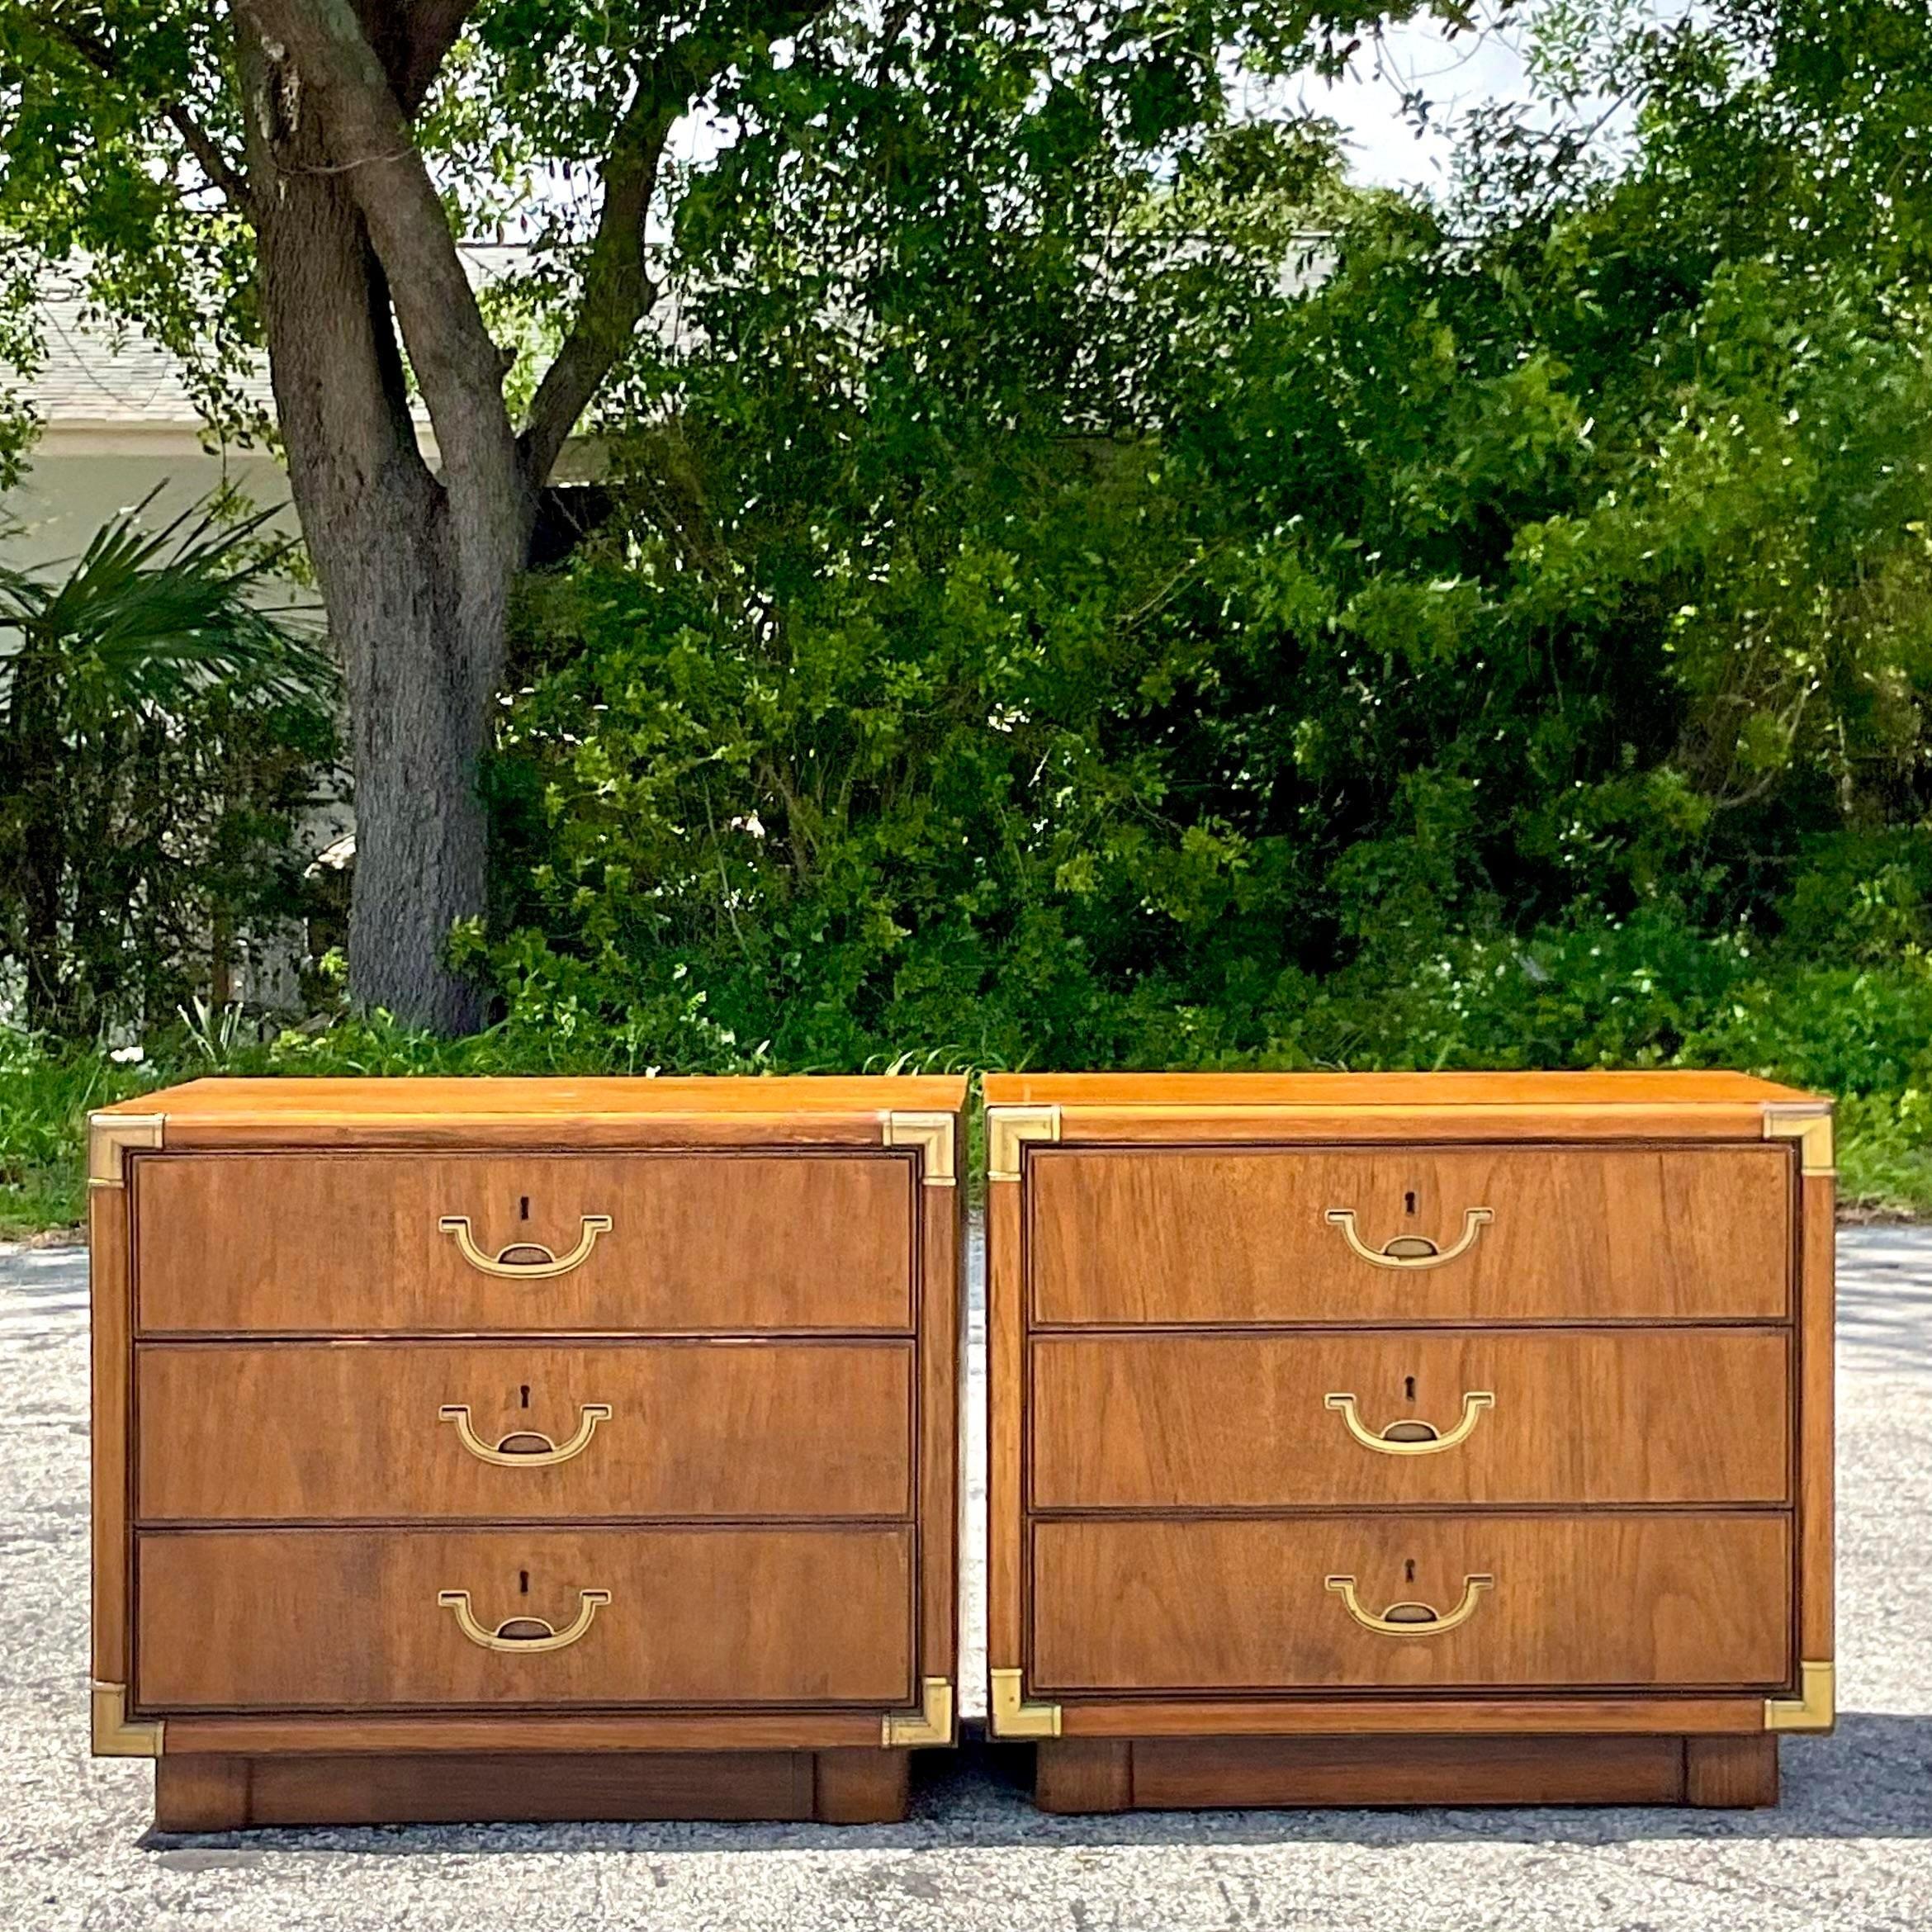 1980s Vintage Boho Drexel Campaign Nightstands - a Pair In Good Condition For Sale In west palm beach, FL